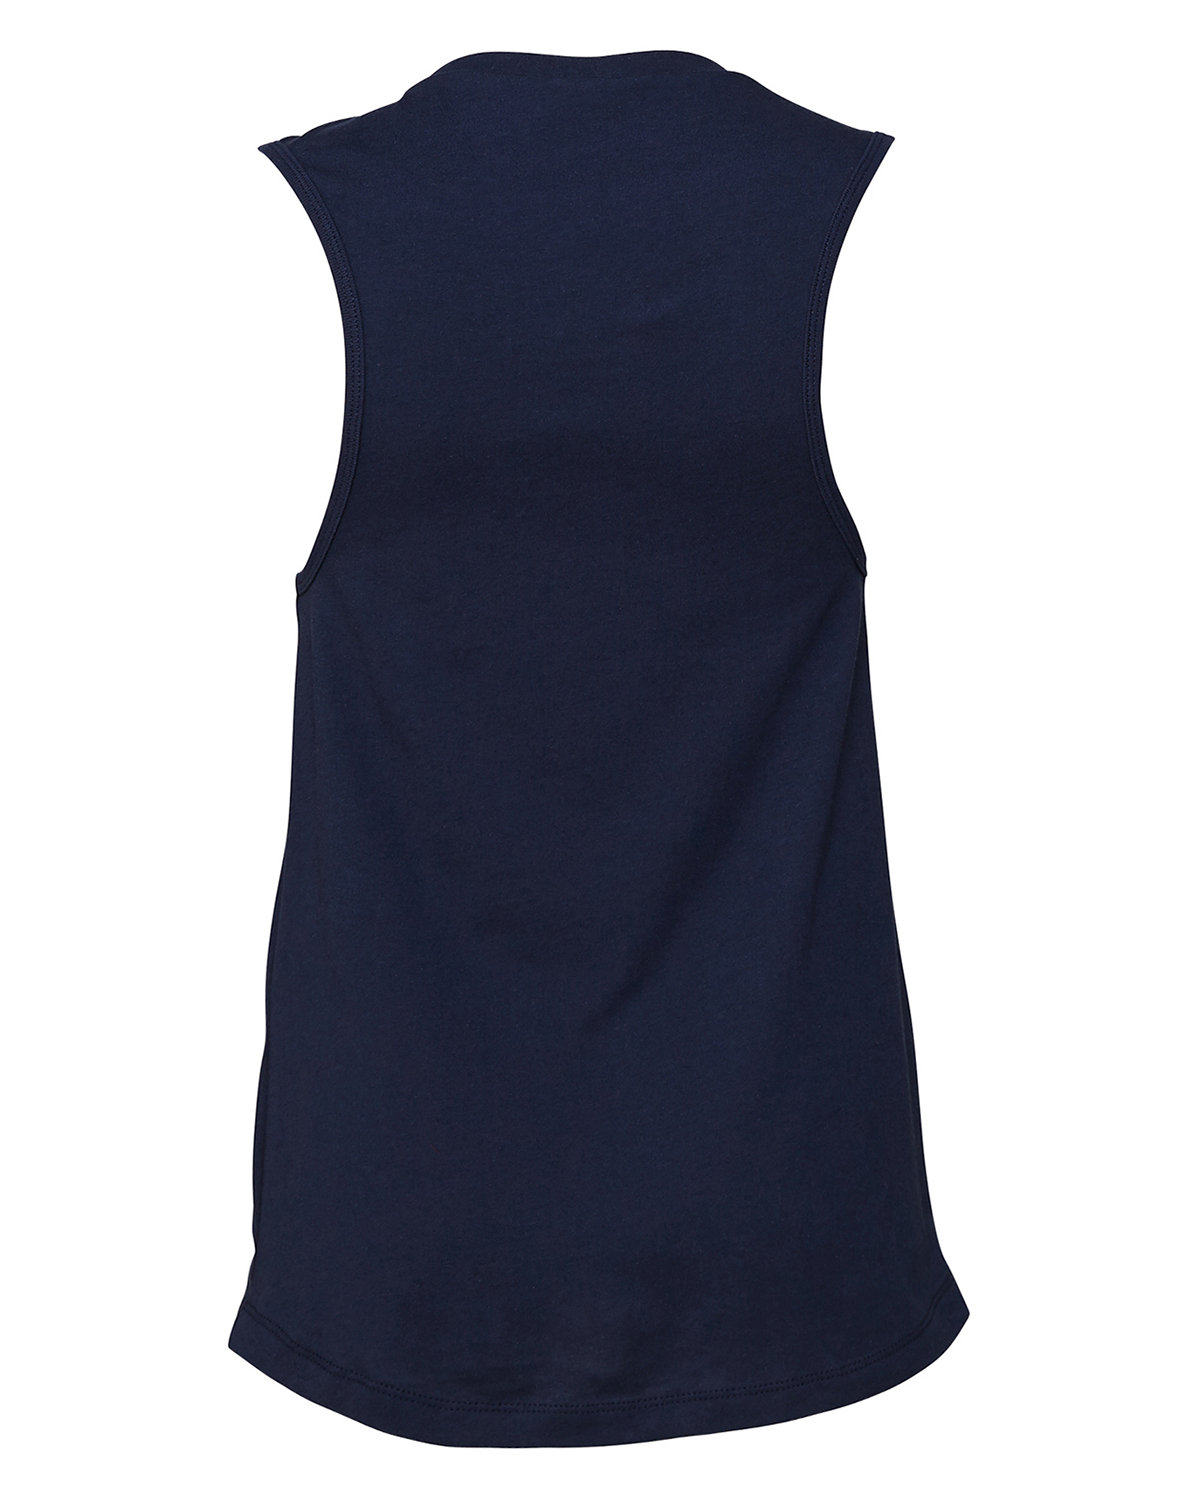 Bella + Canvas Ladies' Jersey Muscle Tank | alphabroder Canada